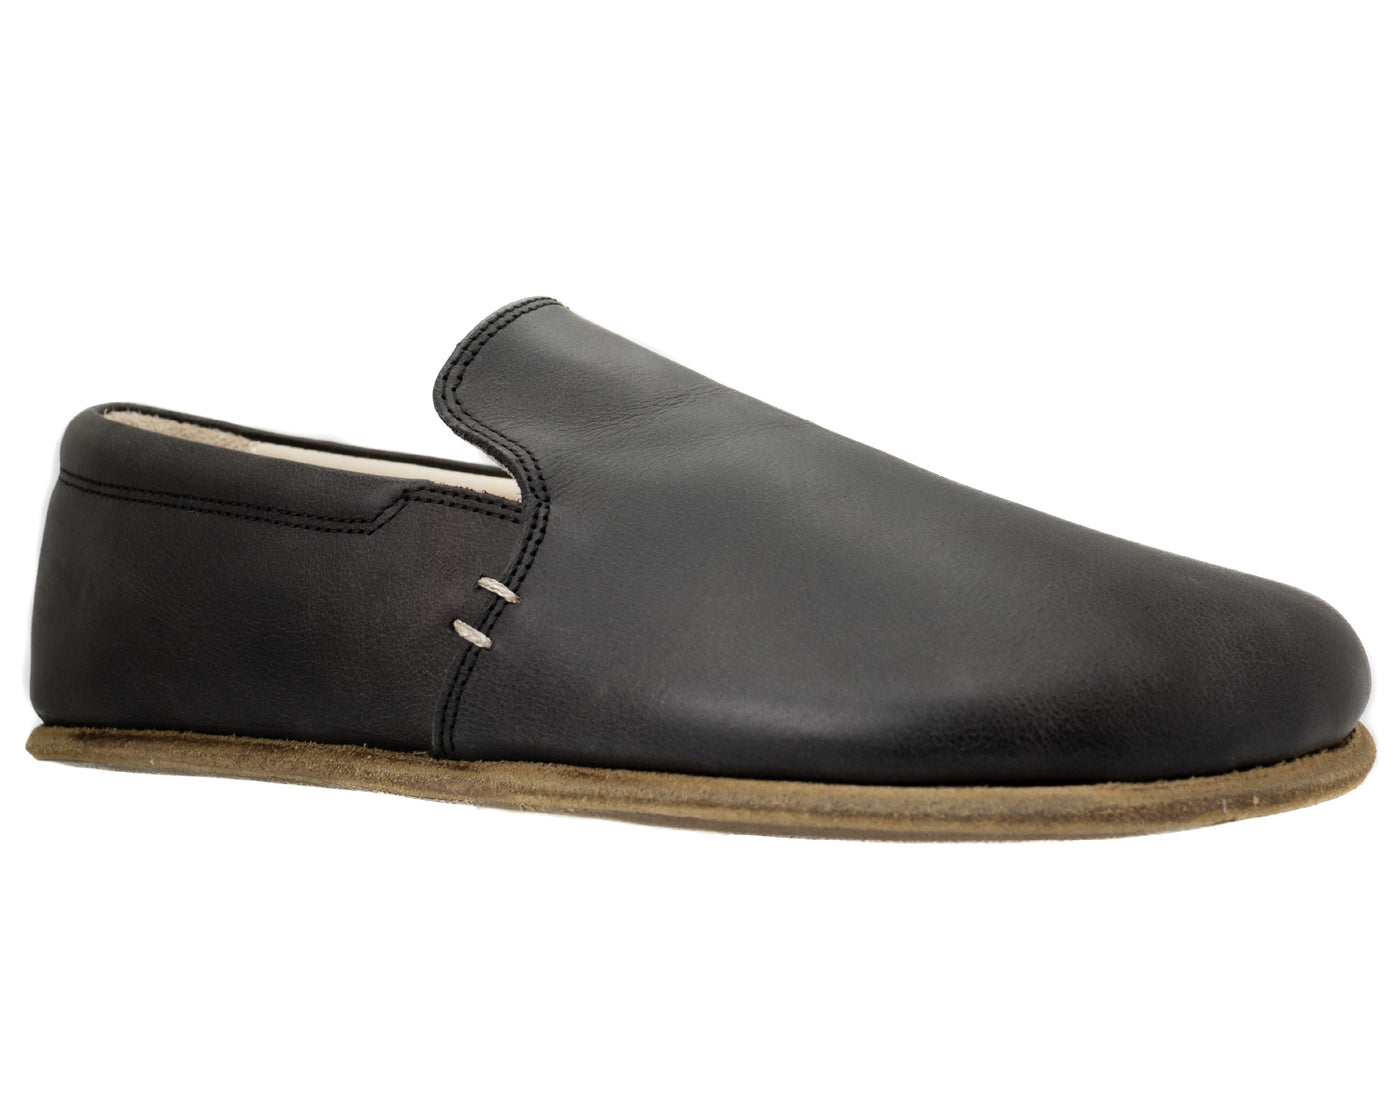 RHIZAL Brio Slip-On / Slate / Womens - Grounded Barefoot Natural Leather